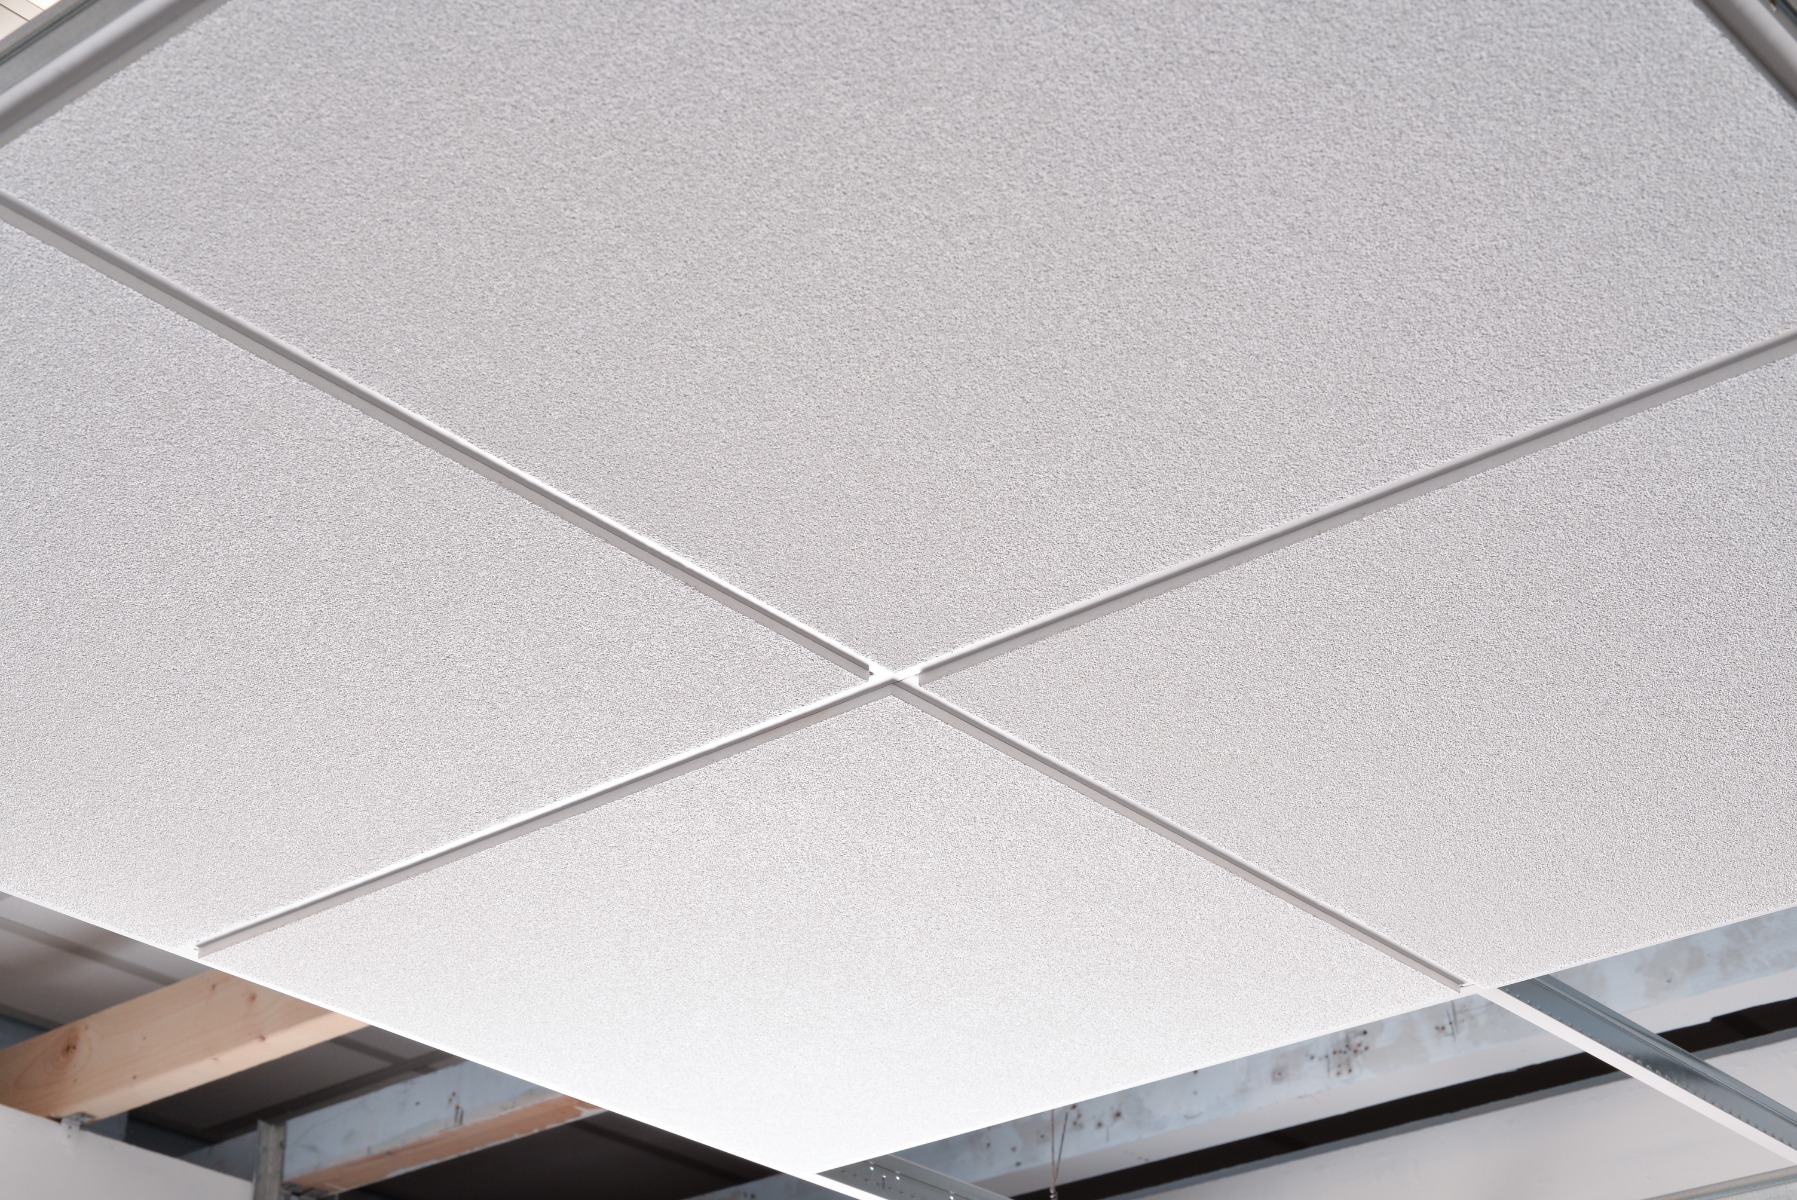 ZENTIA ARMSTRONG Dune Microlook 600mm X 600mm (16 Ceiling Tiles Per Box) to fit a 15mm grid system